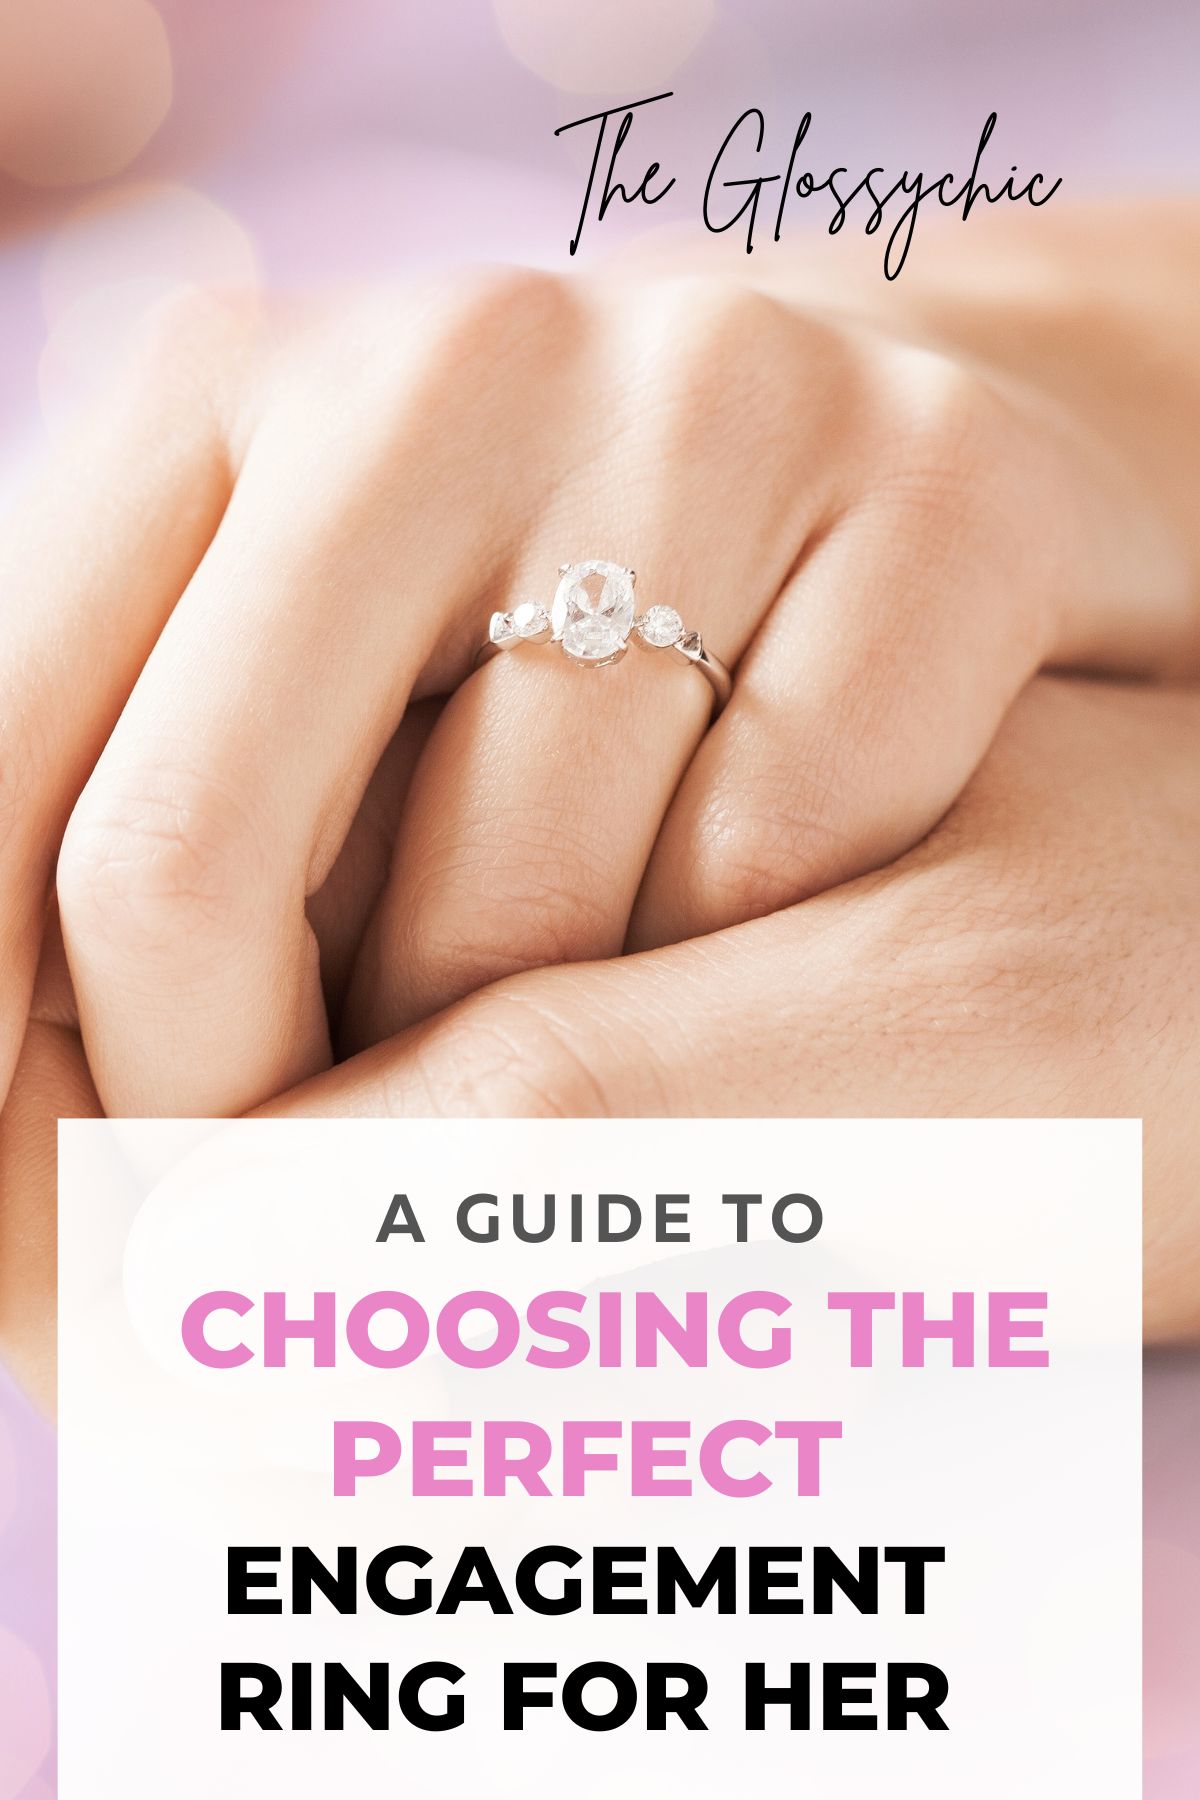 A Guide To Choosing The Perfect Engagement Ring For Her